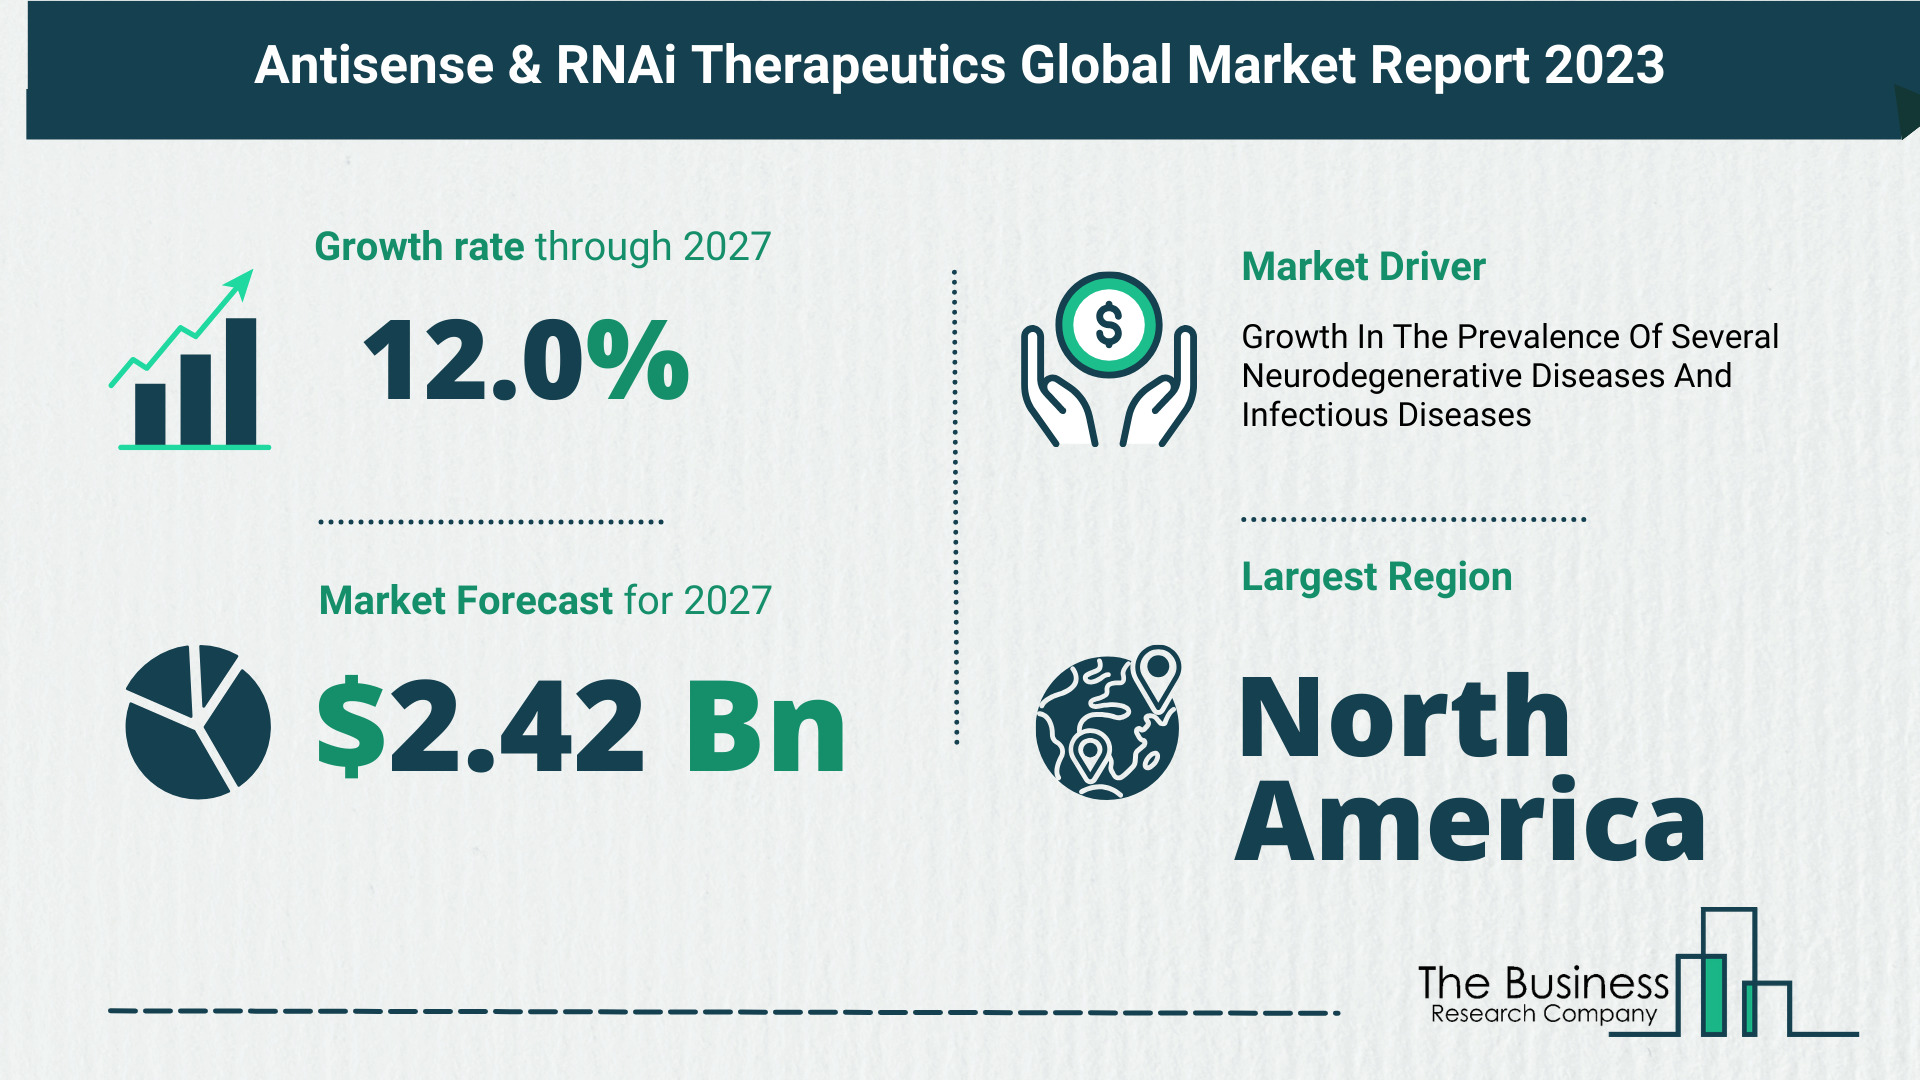 Overview Of The Antisense & RNAi Therapeutics Market 2023: Size, Drivers, And Trends